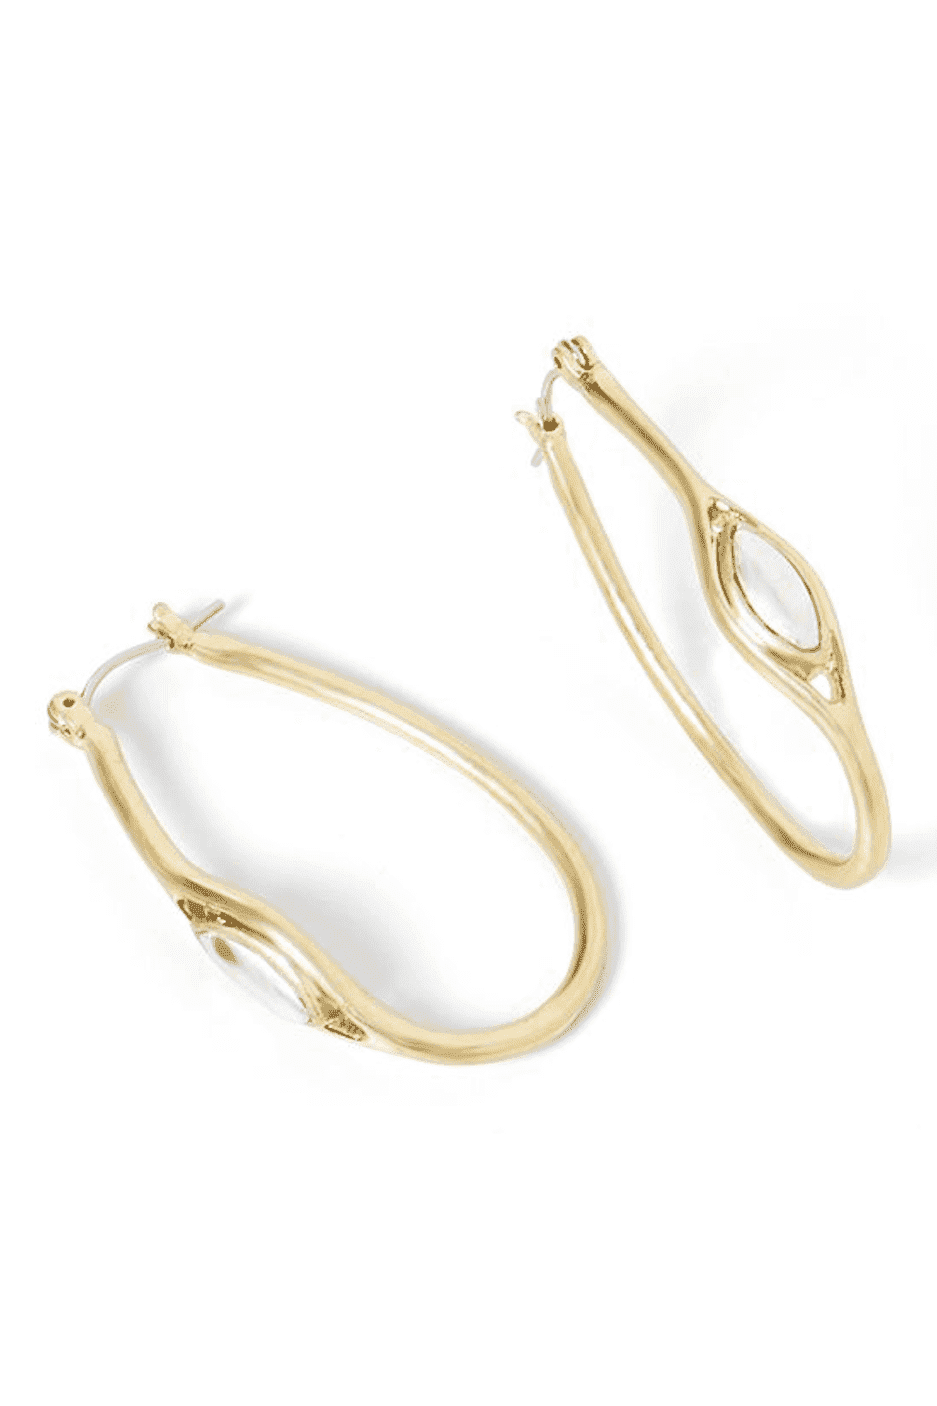 Gold Oval Hoop with Silver